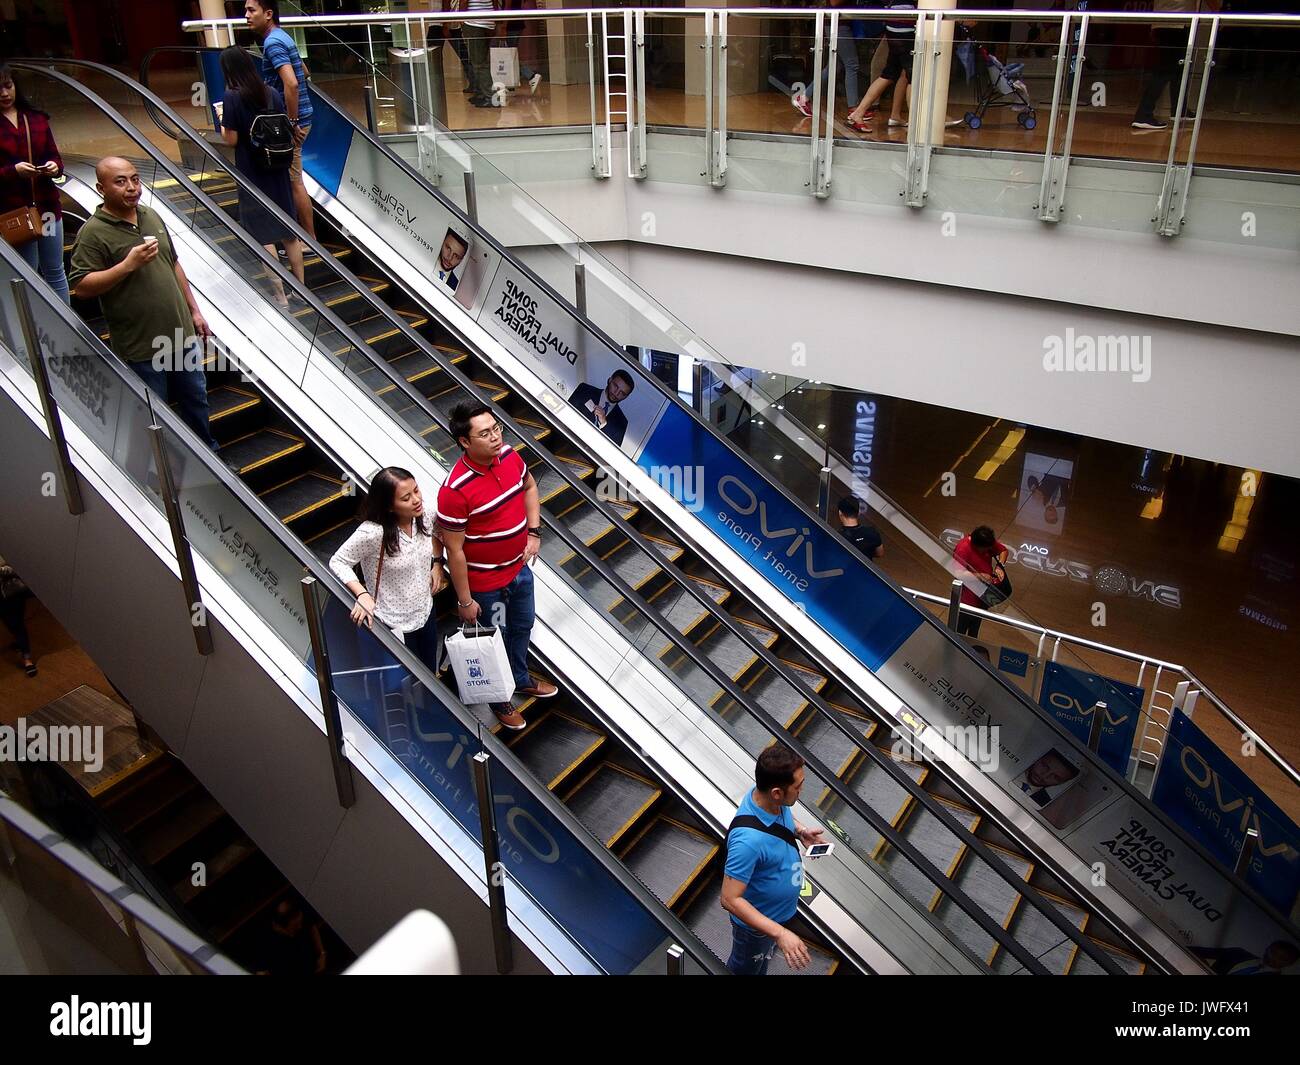 MANDALUYONG CITY, PHILIPPINES - AUGUST 4, 2017: Customers use an escalator to go up and down a mall. Stock Photo